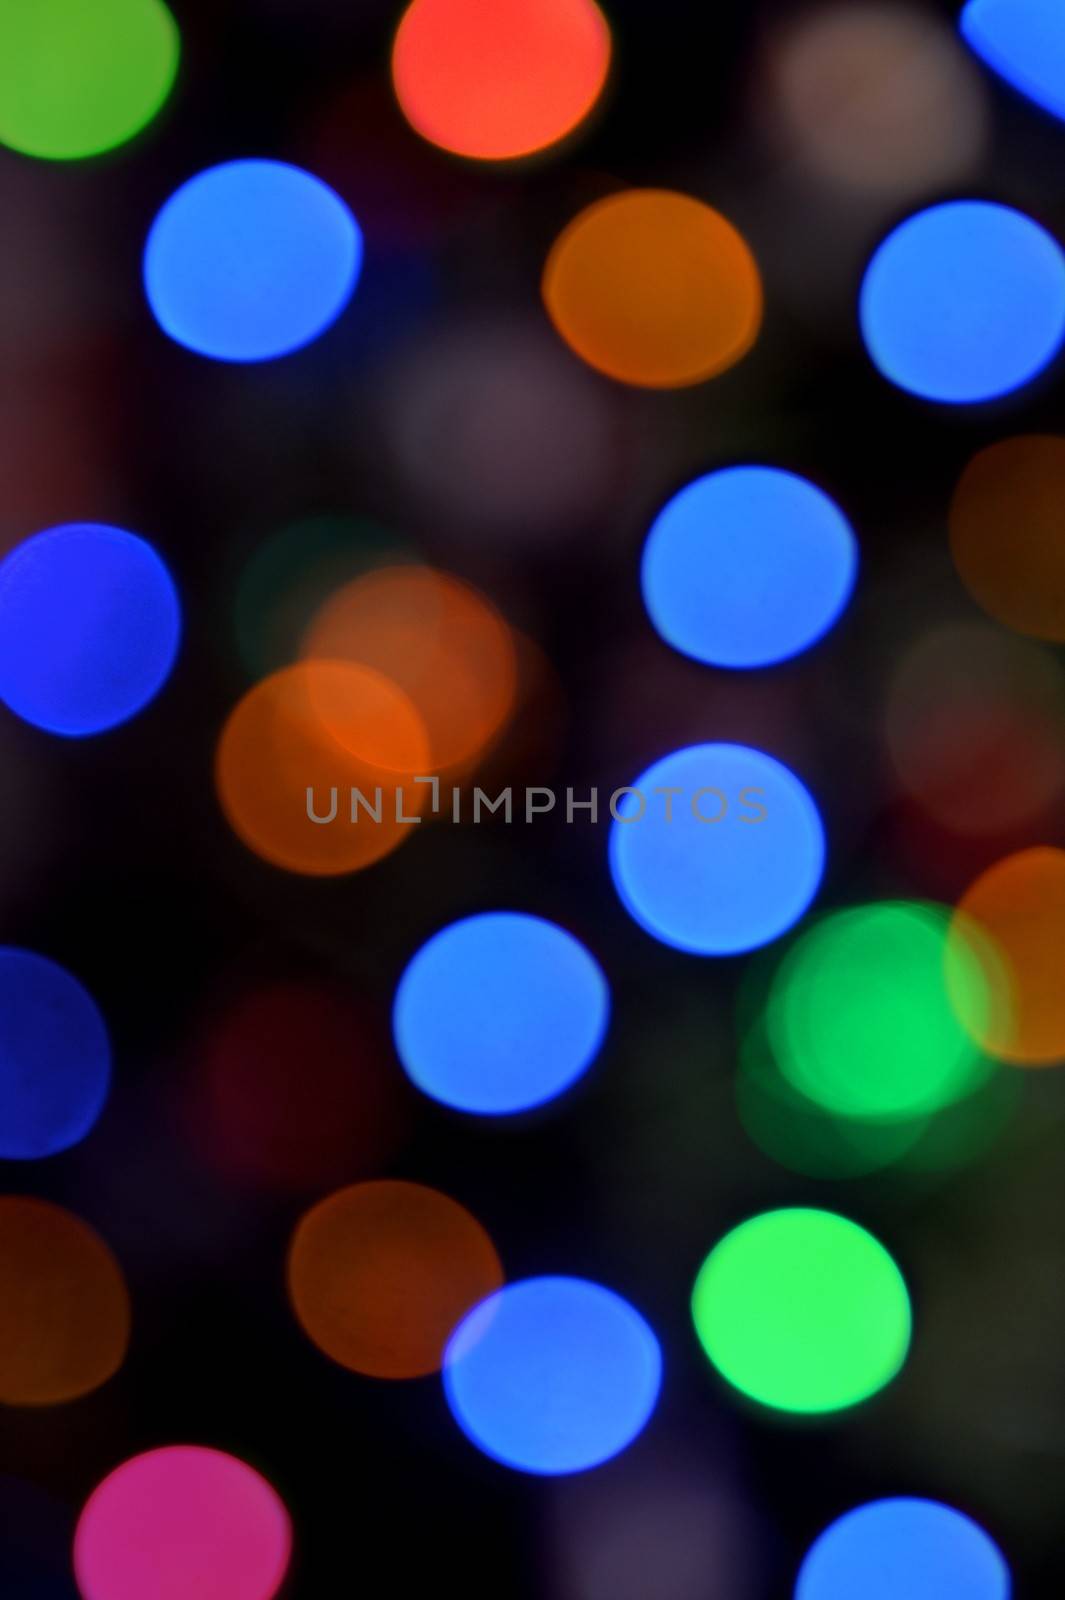 Blurred Lights by Kitch